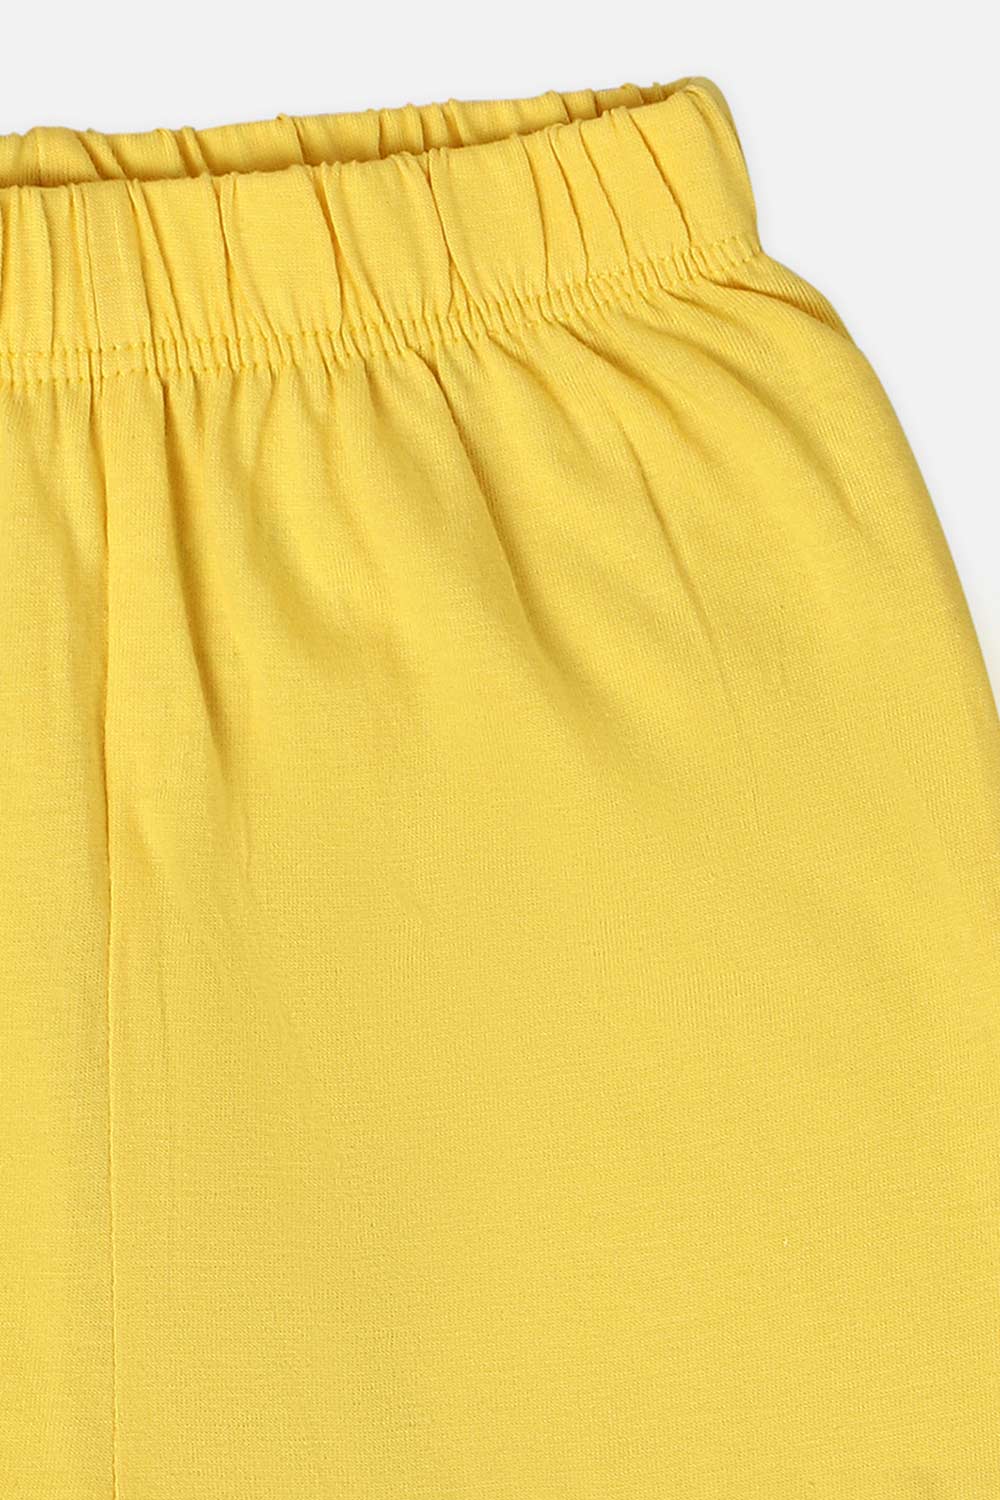 Oh Baby Comfy Pant Yellow-Tr02